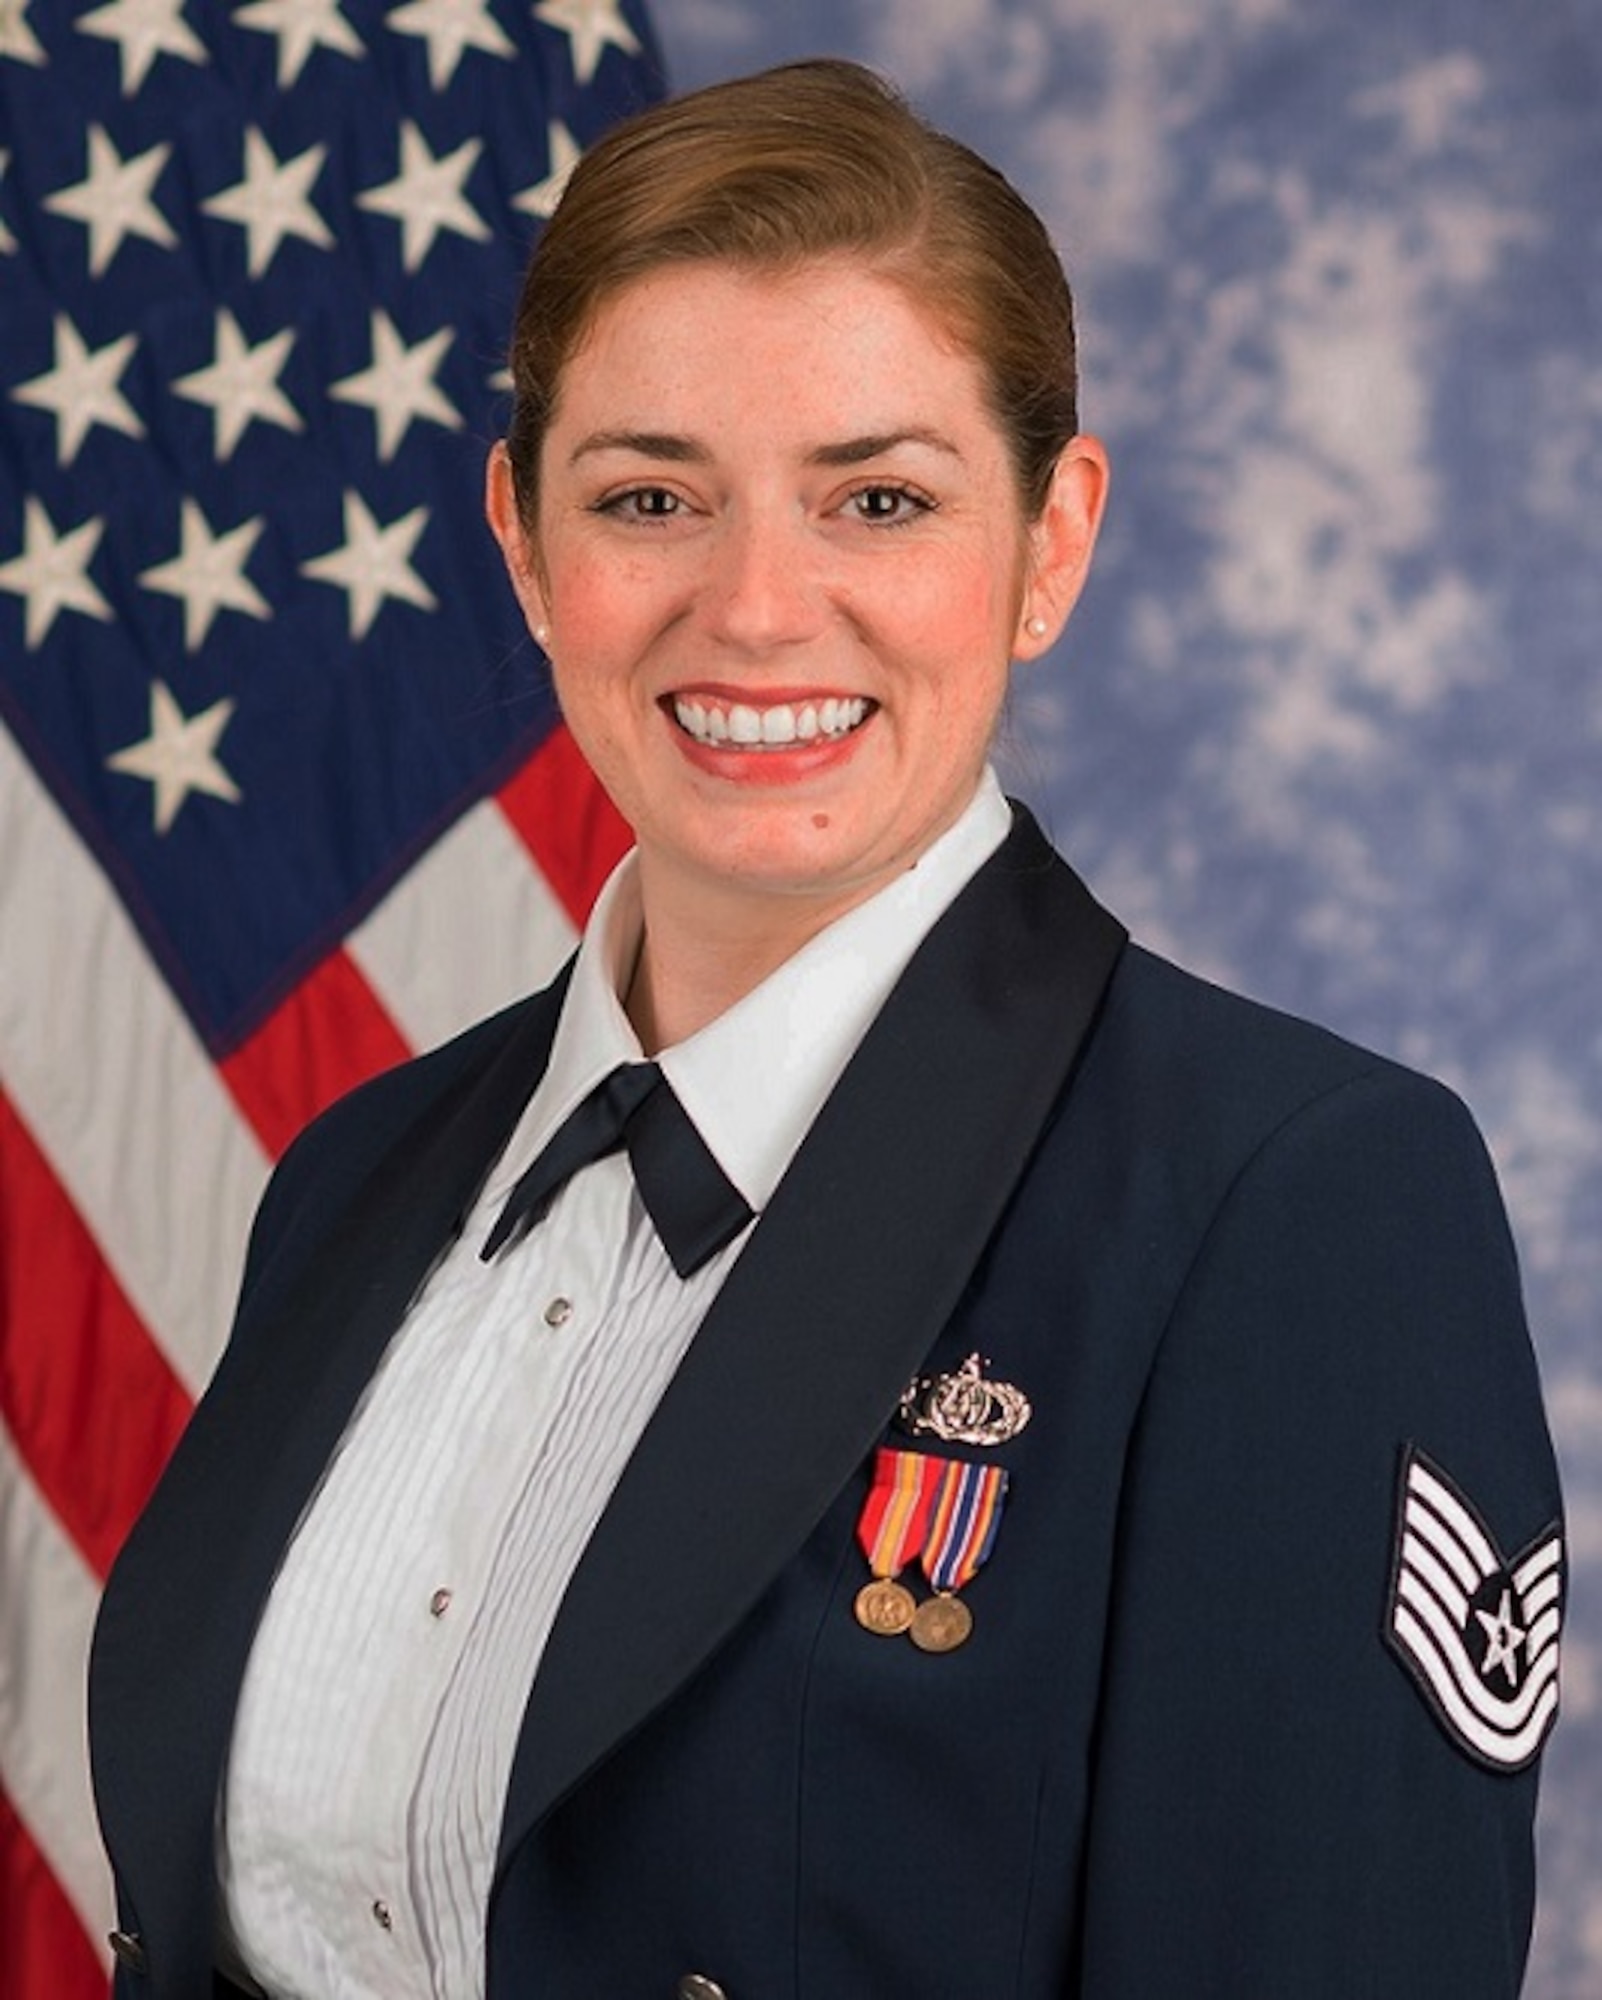 Official photo of Technical Sgt. Katie Baughman, soprano vocalist with The United States Air Force Singing Sergeants. (U.S. Air Force Photo by MSgt Brandon Chaney/released)